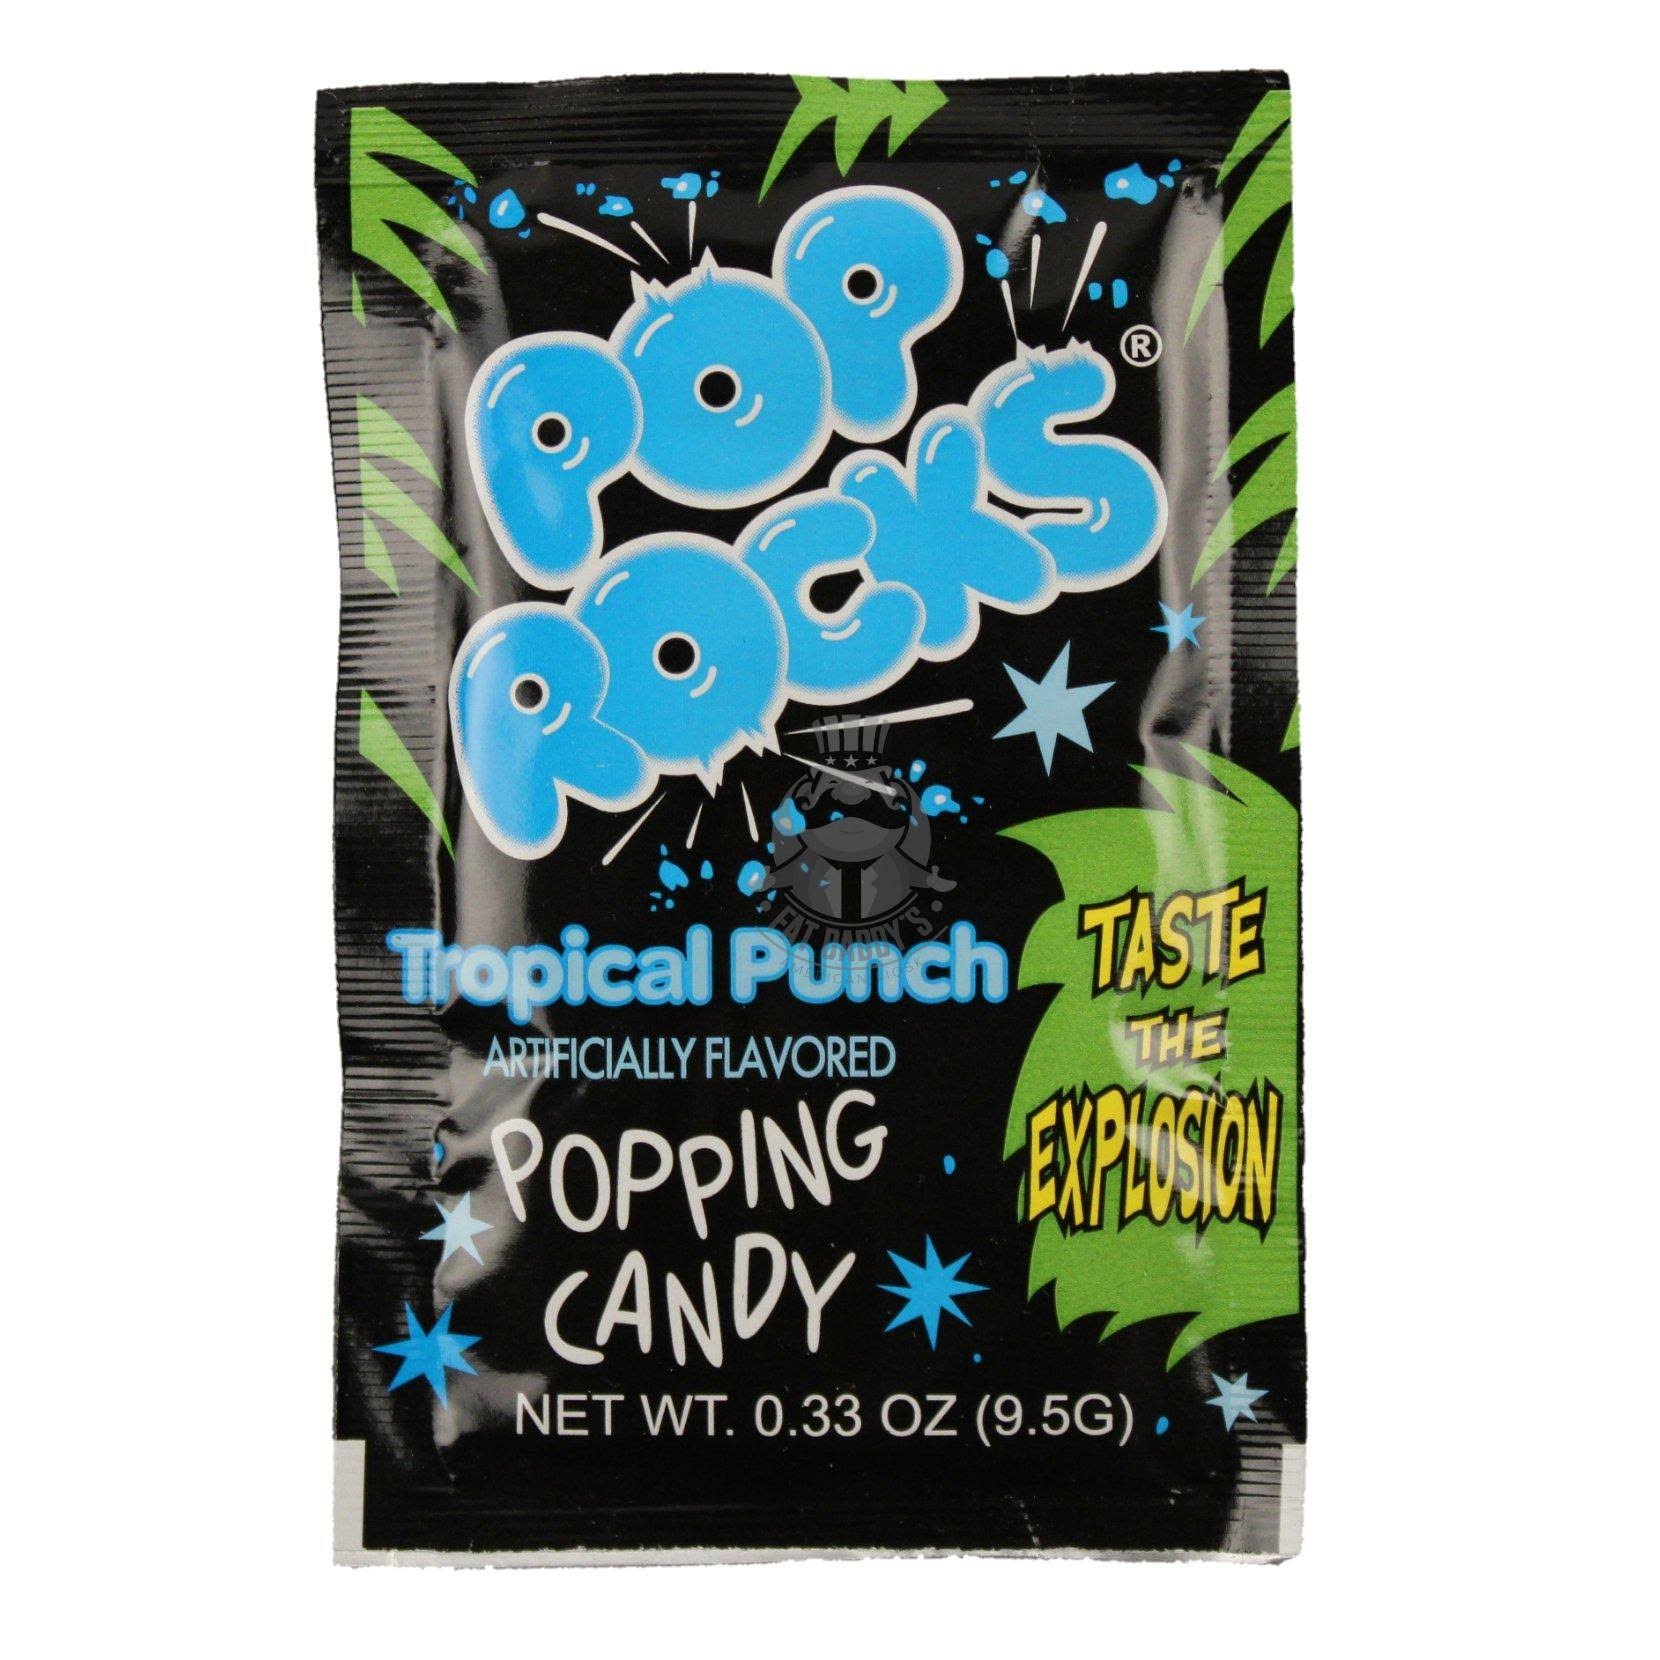 Pop Rocks Popping Candy - Tropical Punch, 9.5g